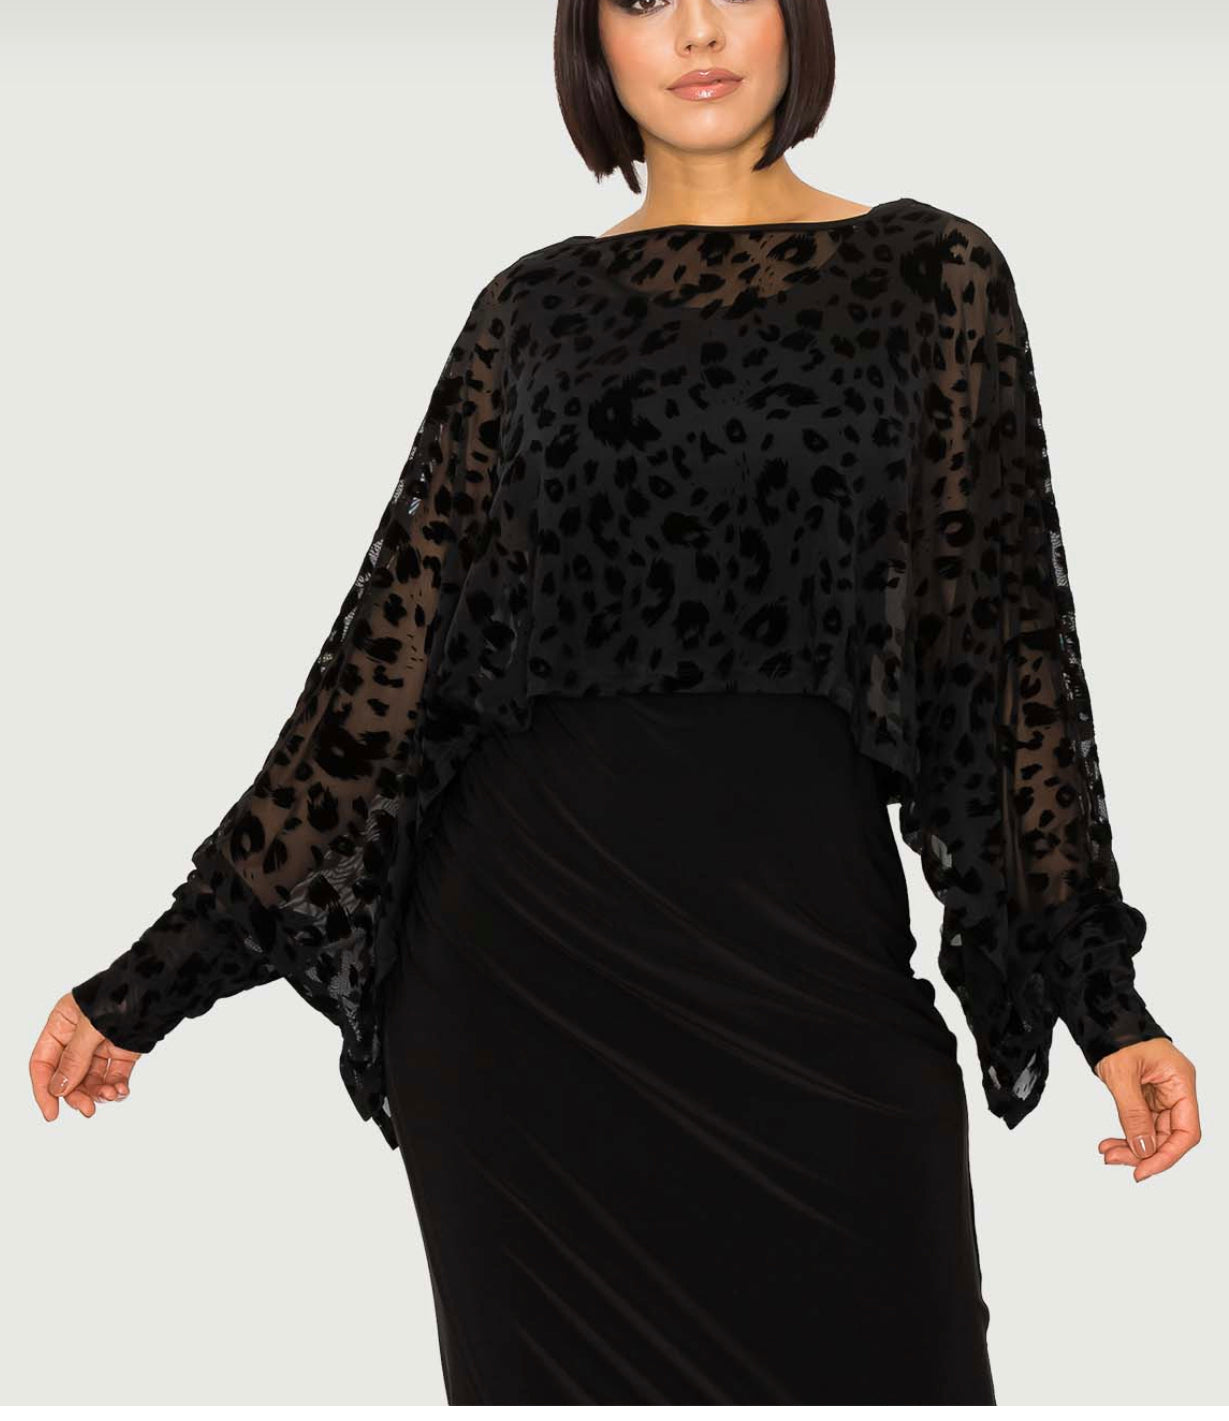 High-Low Batwing Top with Arm Cuffs